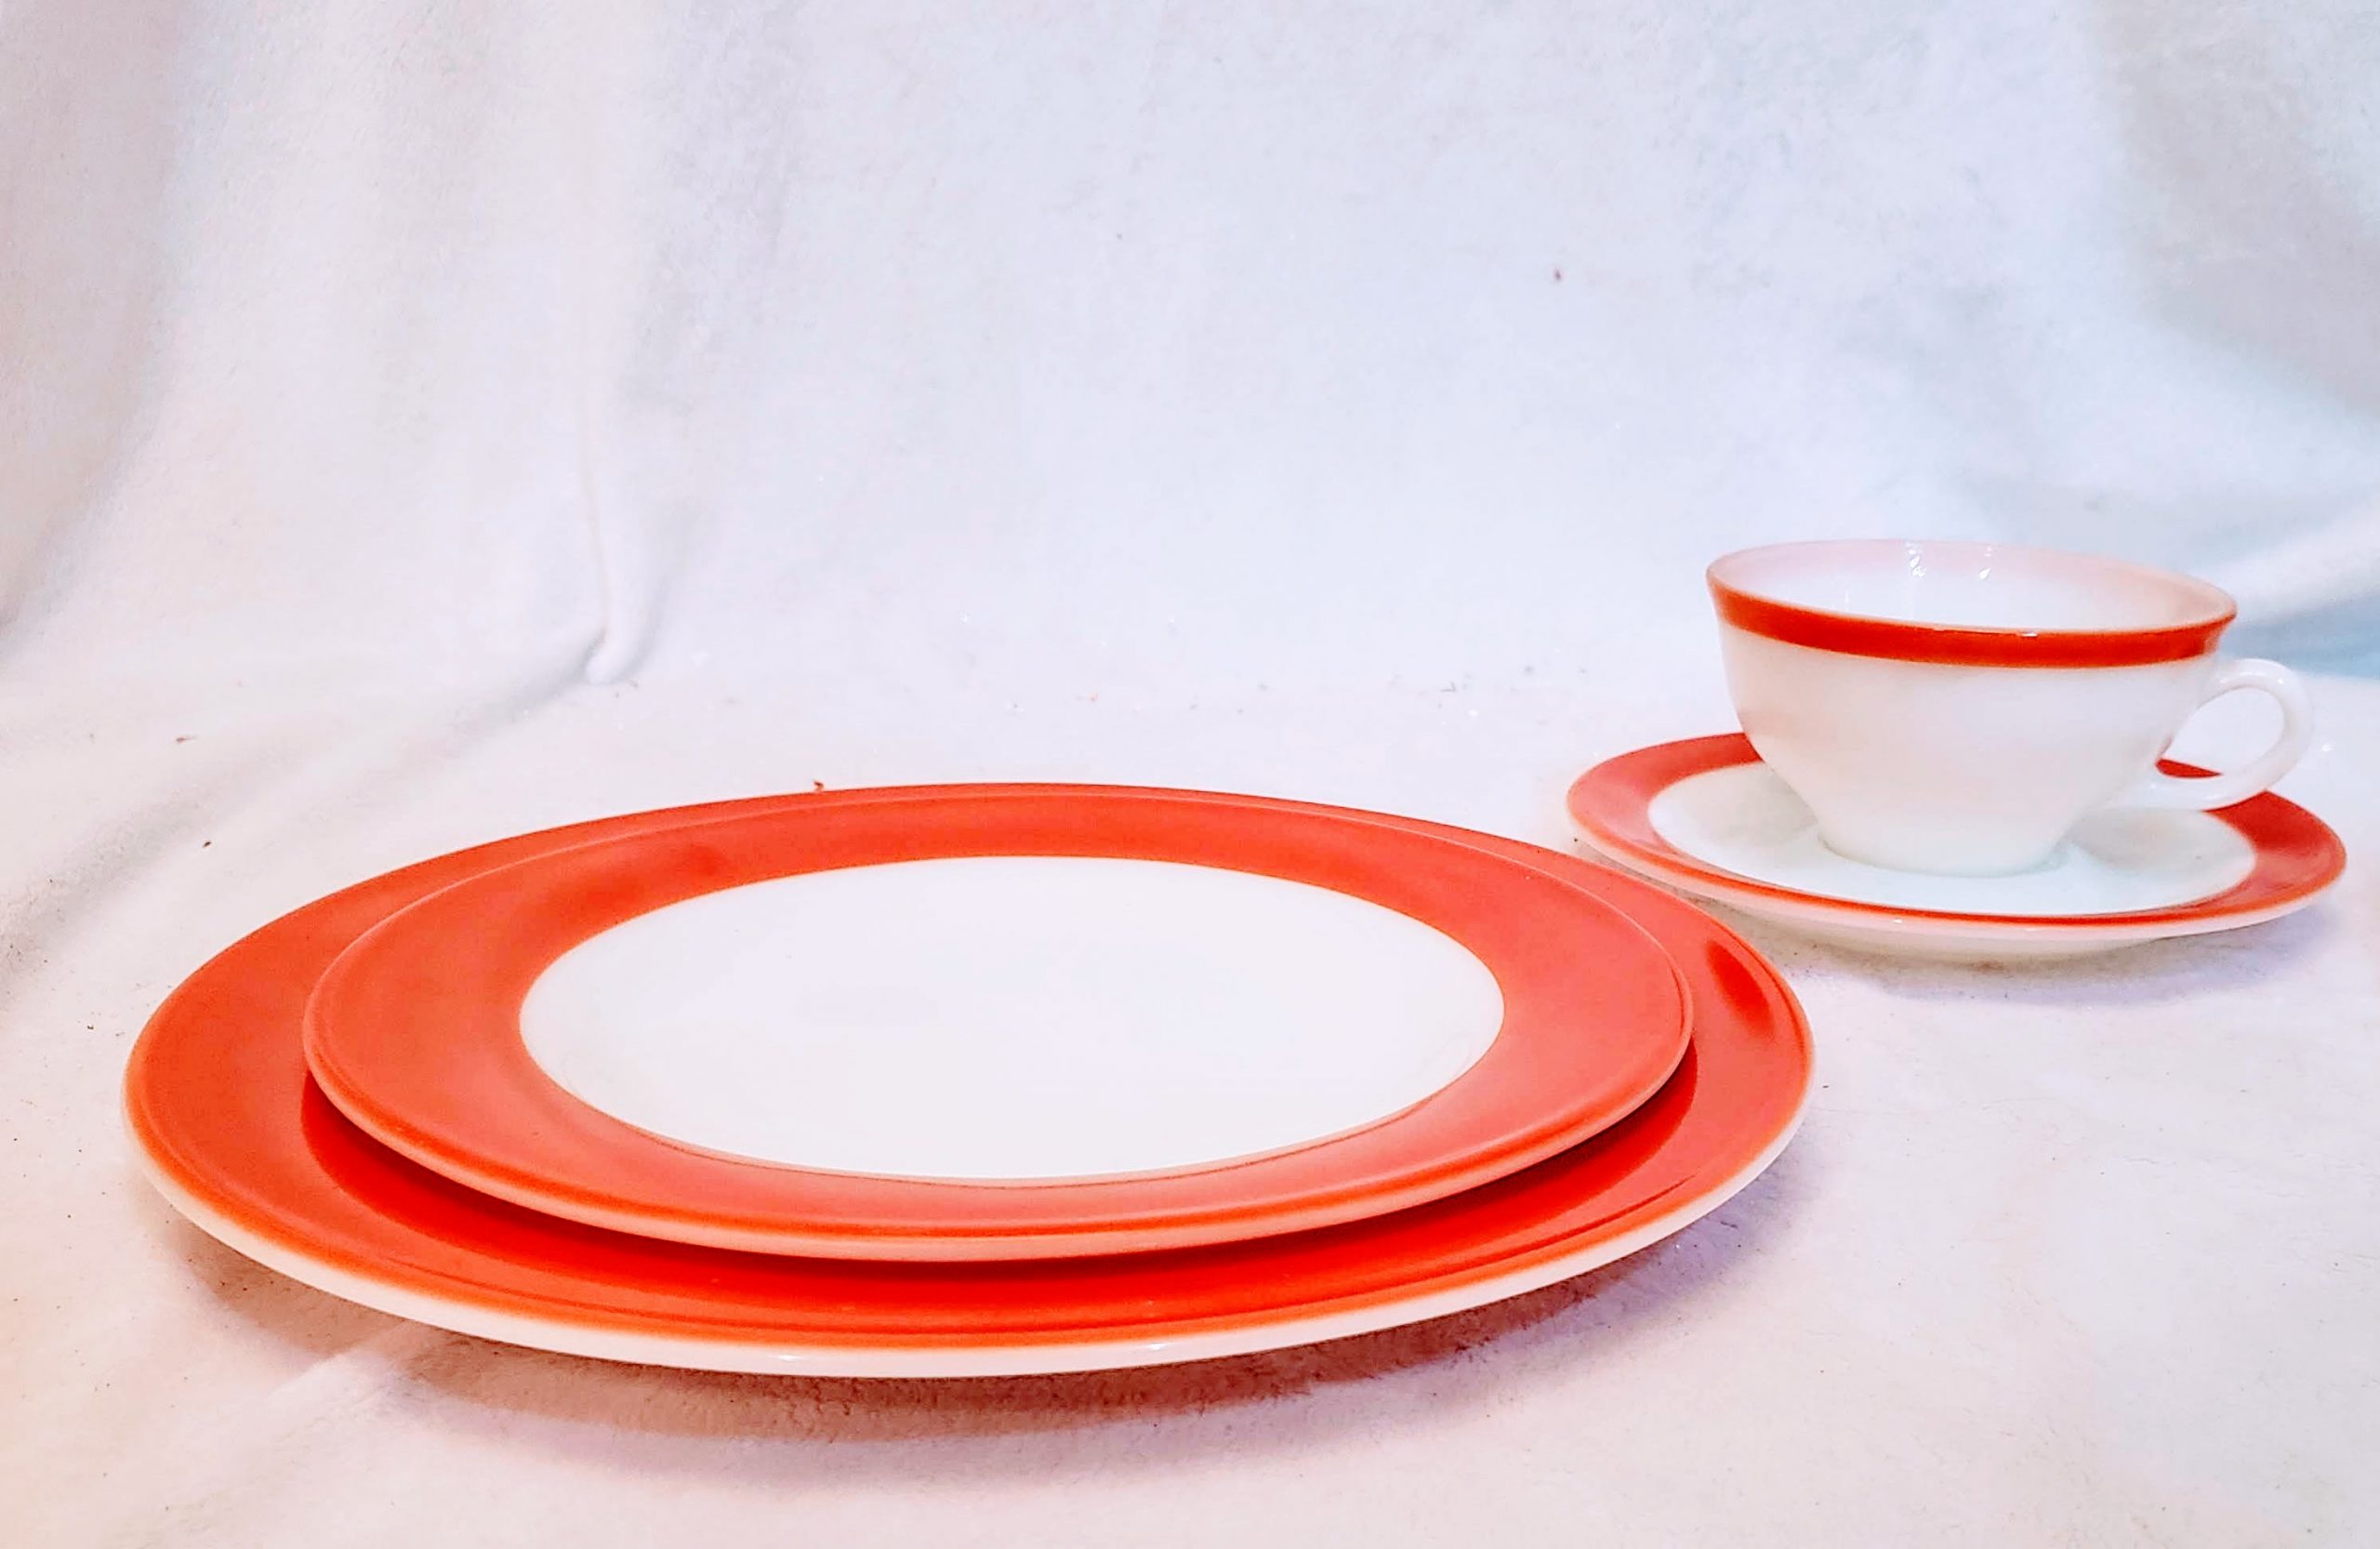 https://serstyle.com/wp-content/uploads/2020/02/Vintage-Pyrex-Flamingo-Dish-Set-with-Box-and-Sugar-Bowl-setting-scaled.jpg